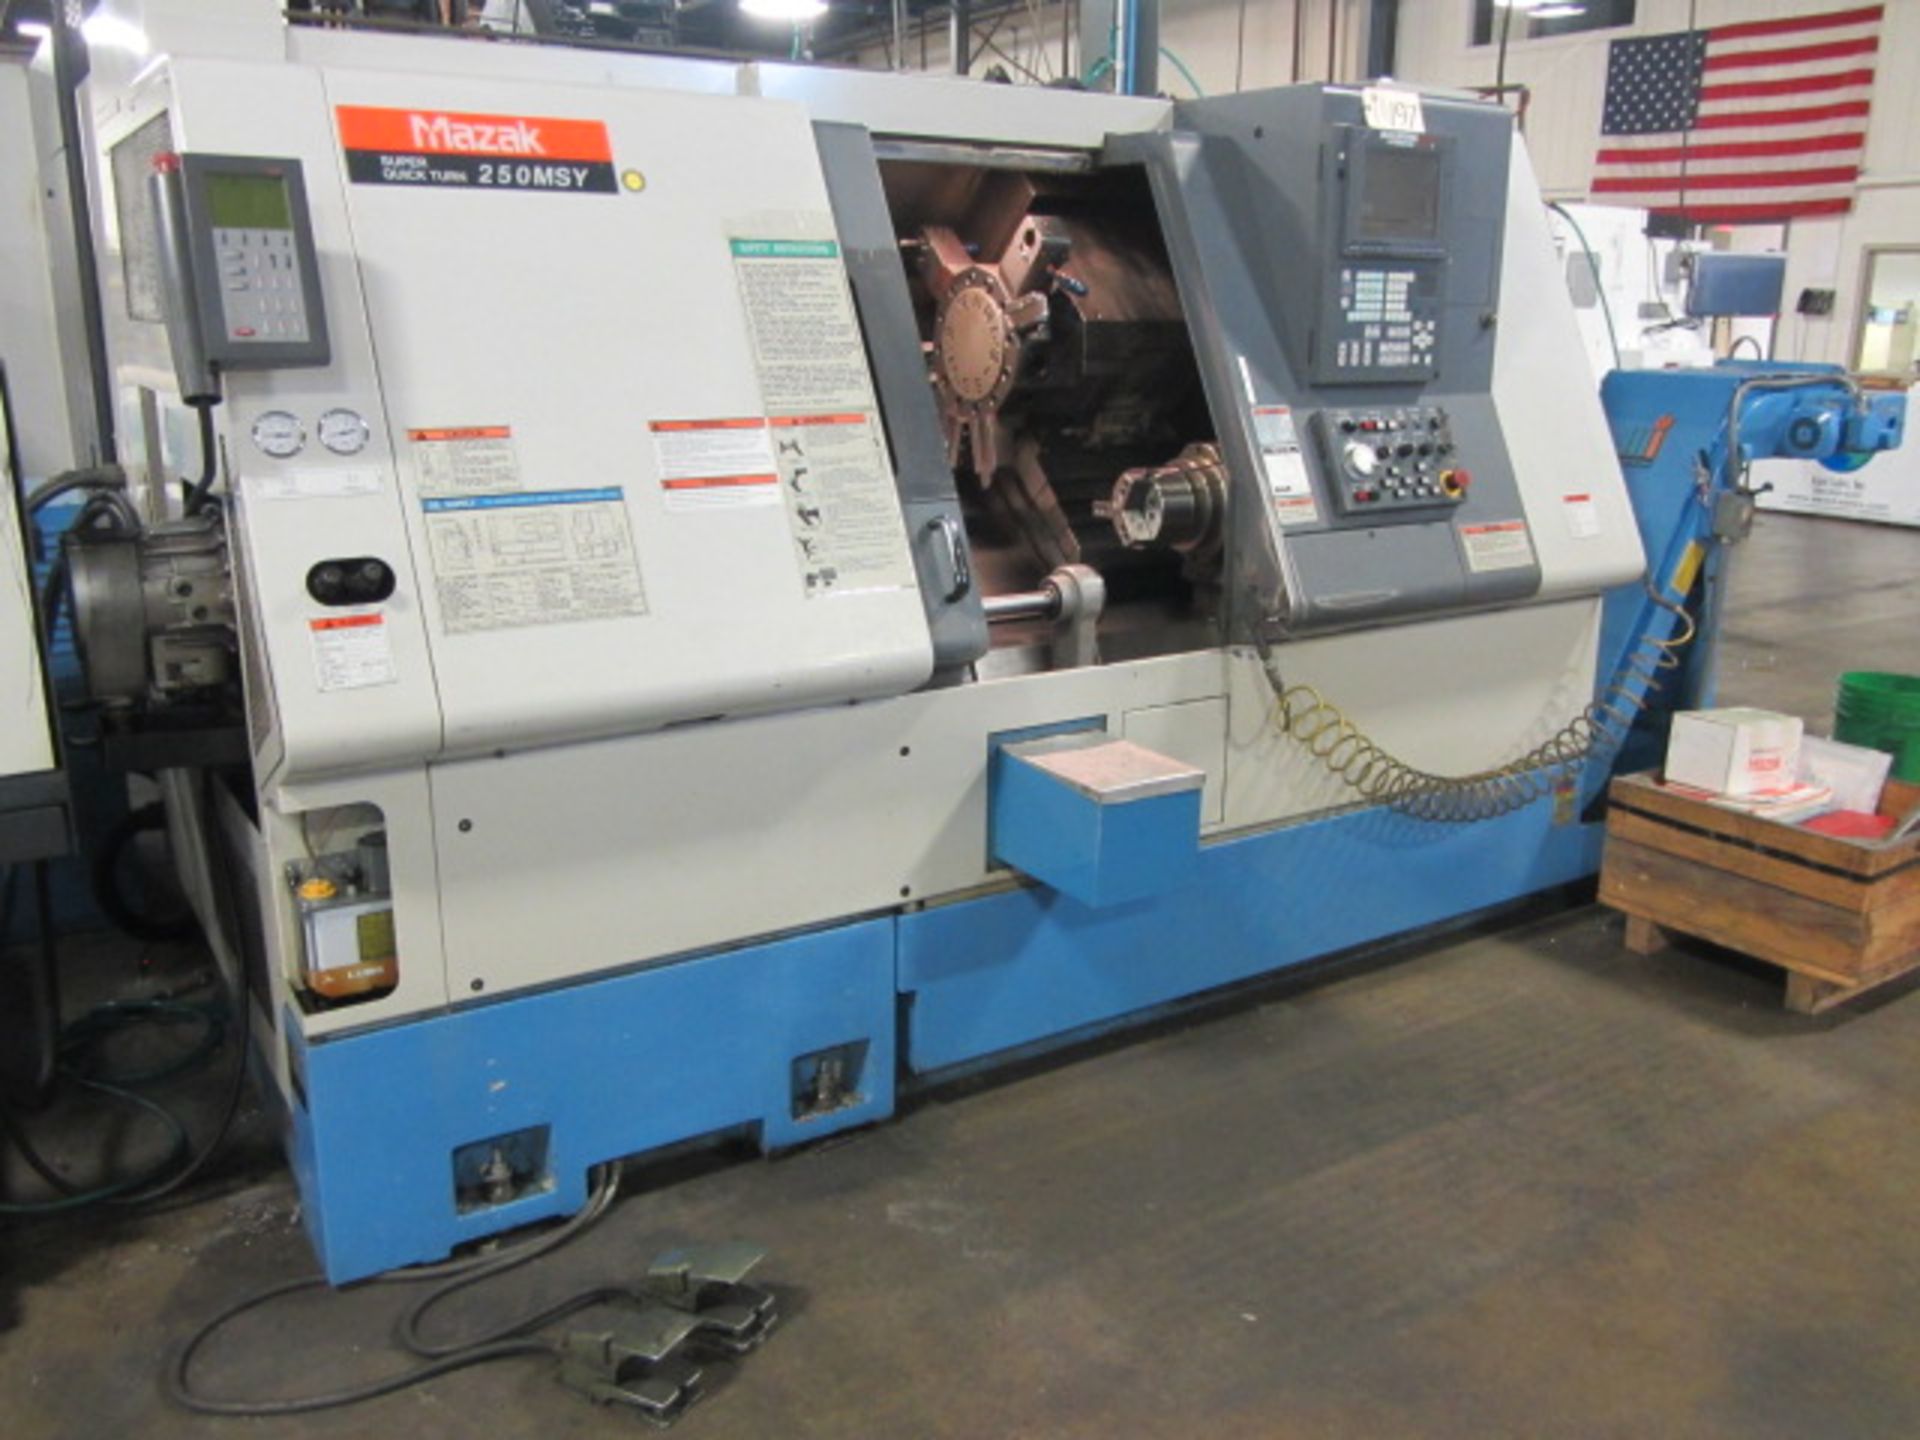 Mazak Super Quick Turn 250-MSY CNC Turning Center with Sub-Spindle, Milling & Y-Axis, 12 Position - Image 5 of 8